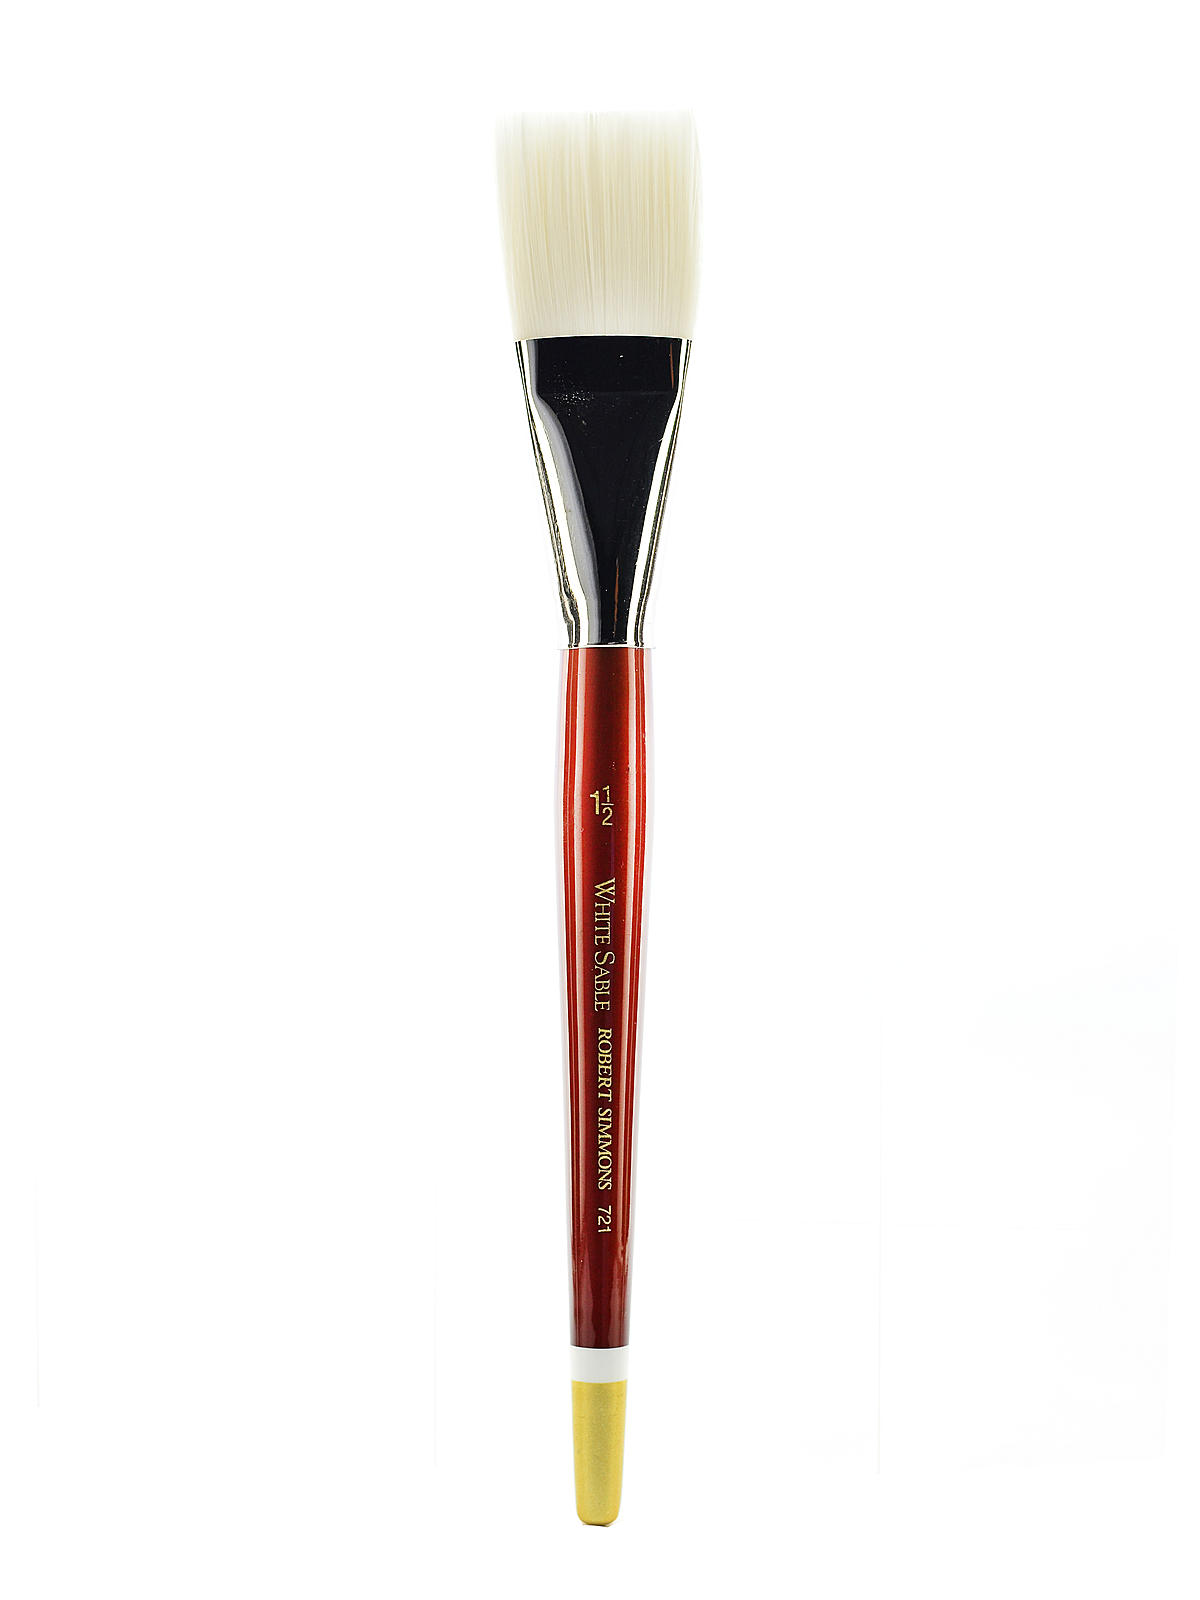 White Sable Short Handle Brushes 1 1 2 In. One Stroke 721